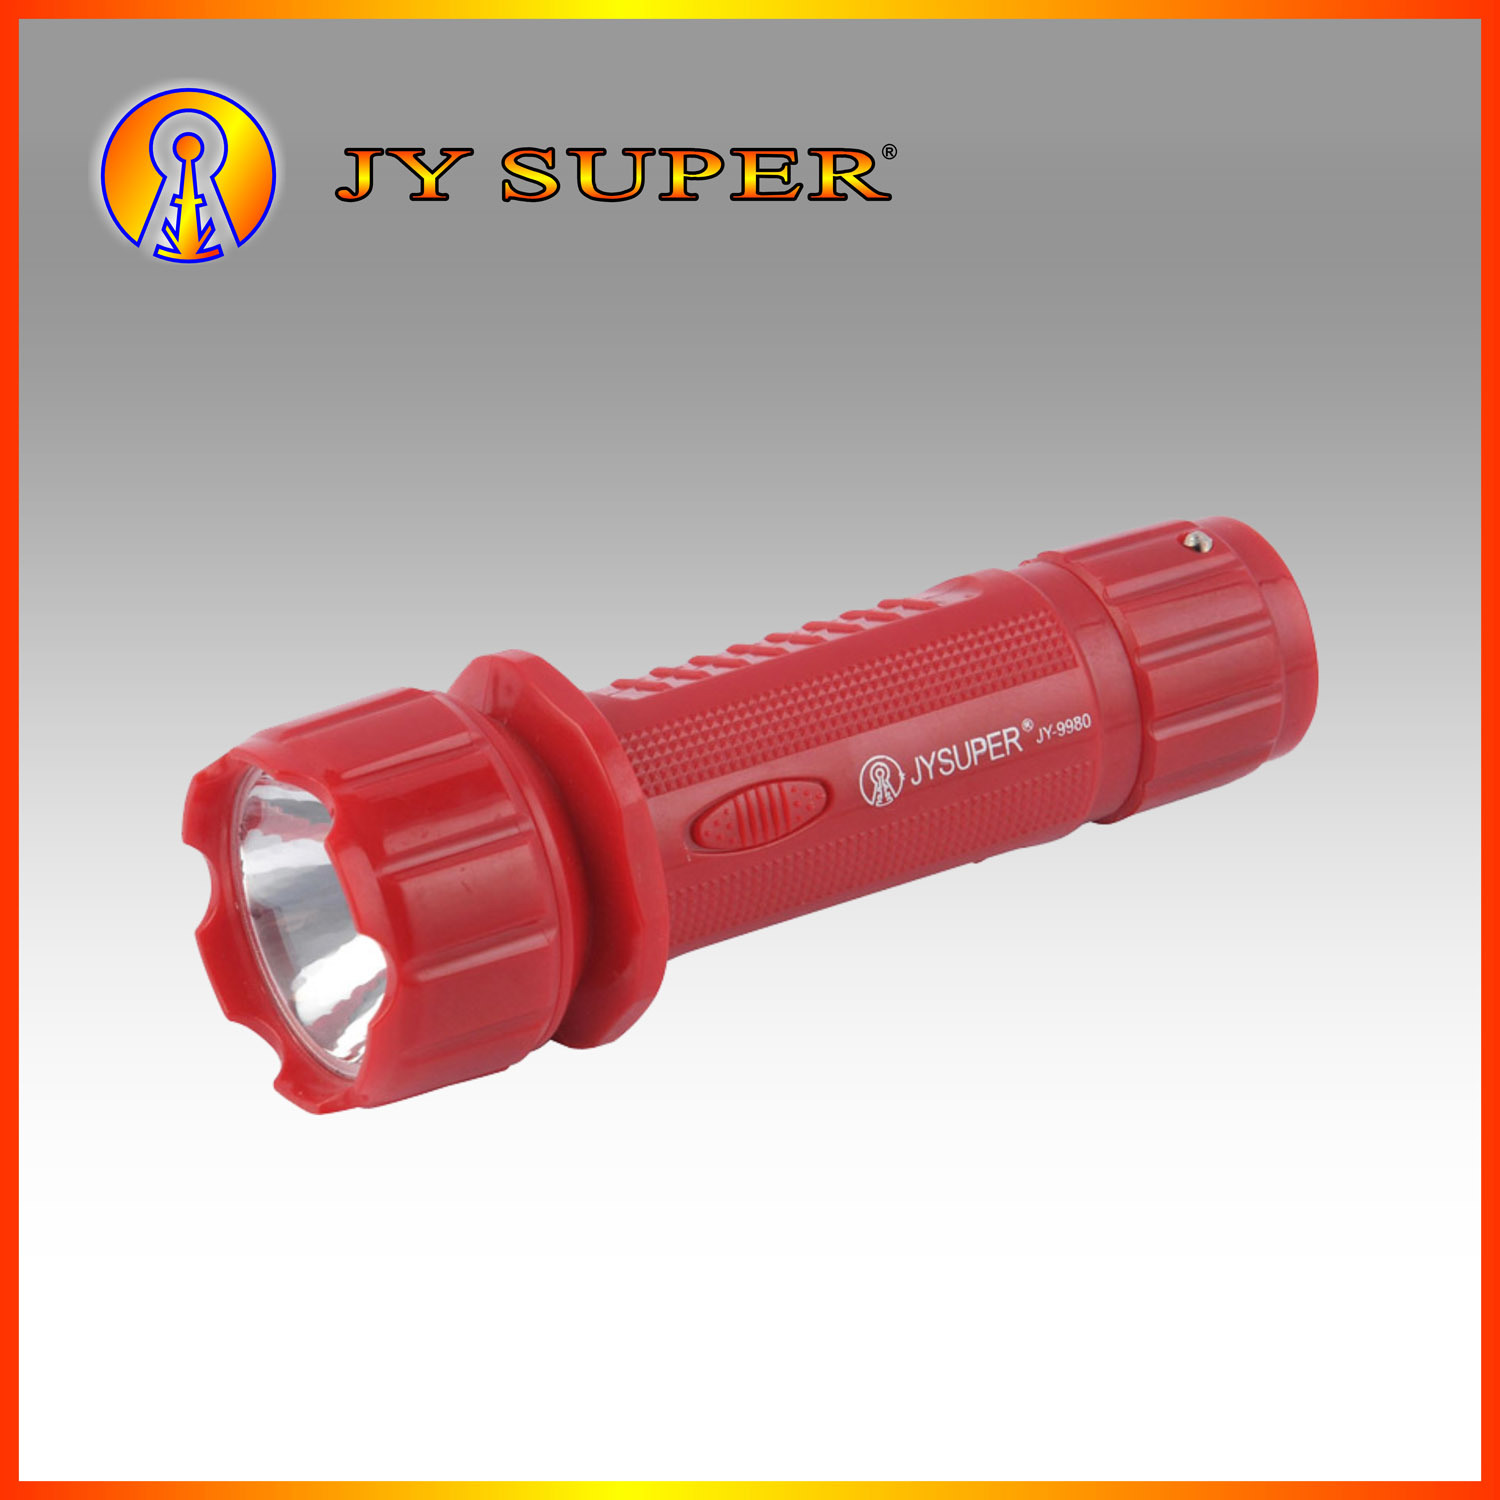 Jysuper 0.5W Rechargeable LED Flashlight for Outdoor (JY-9980)